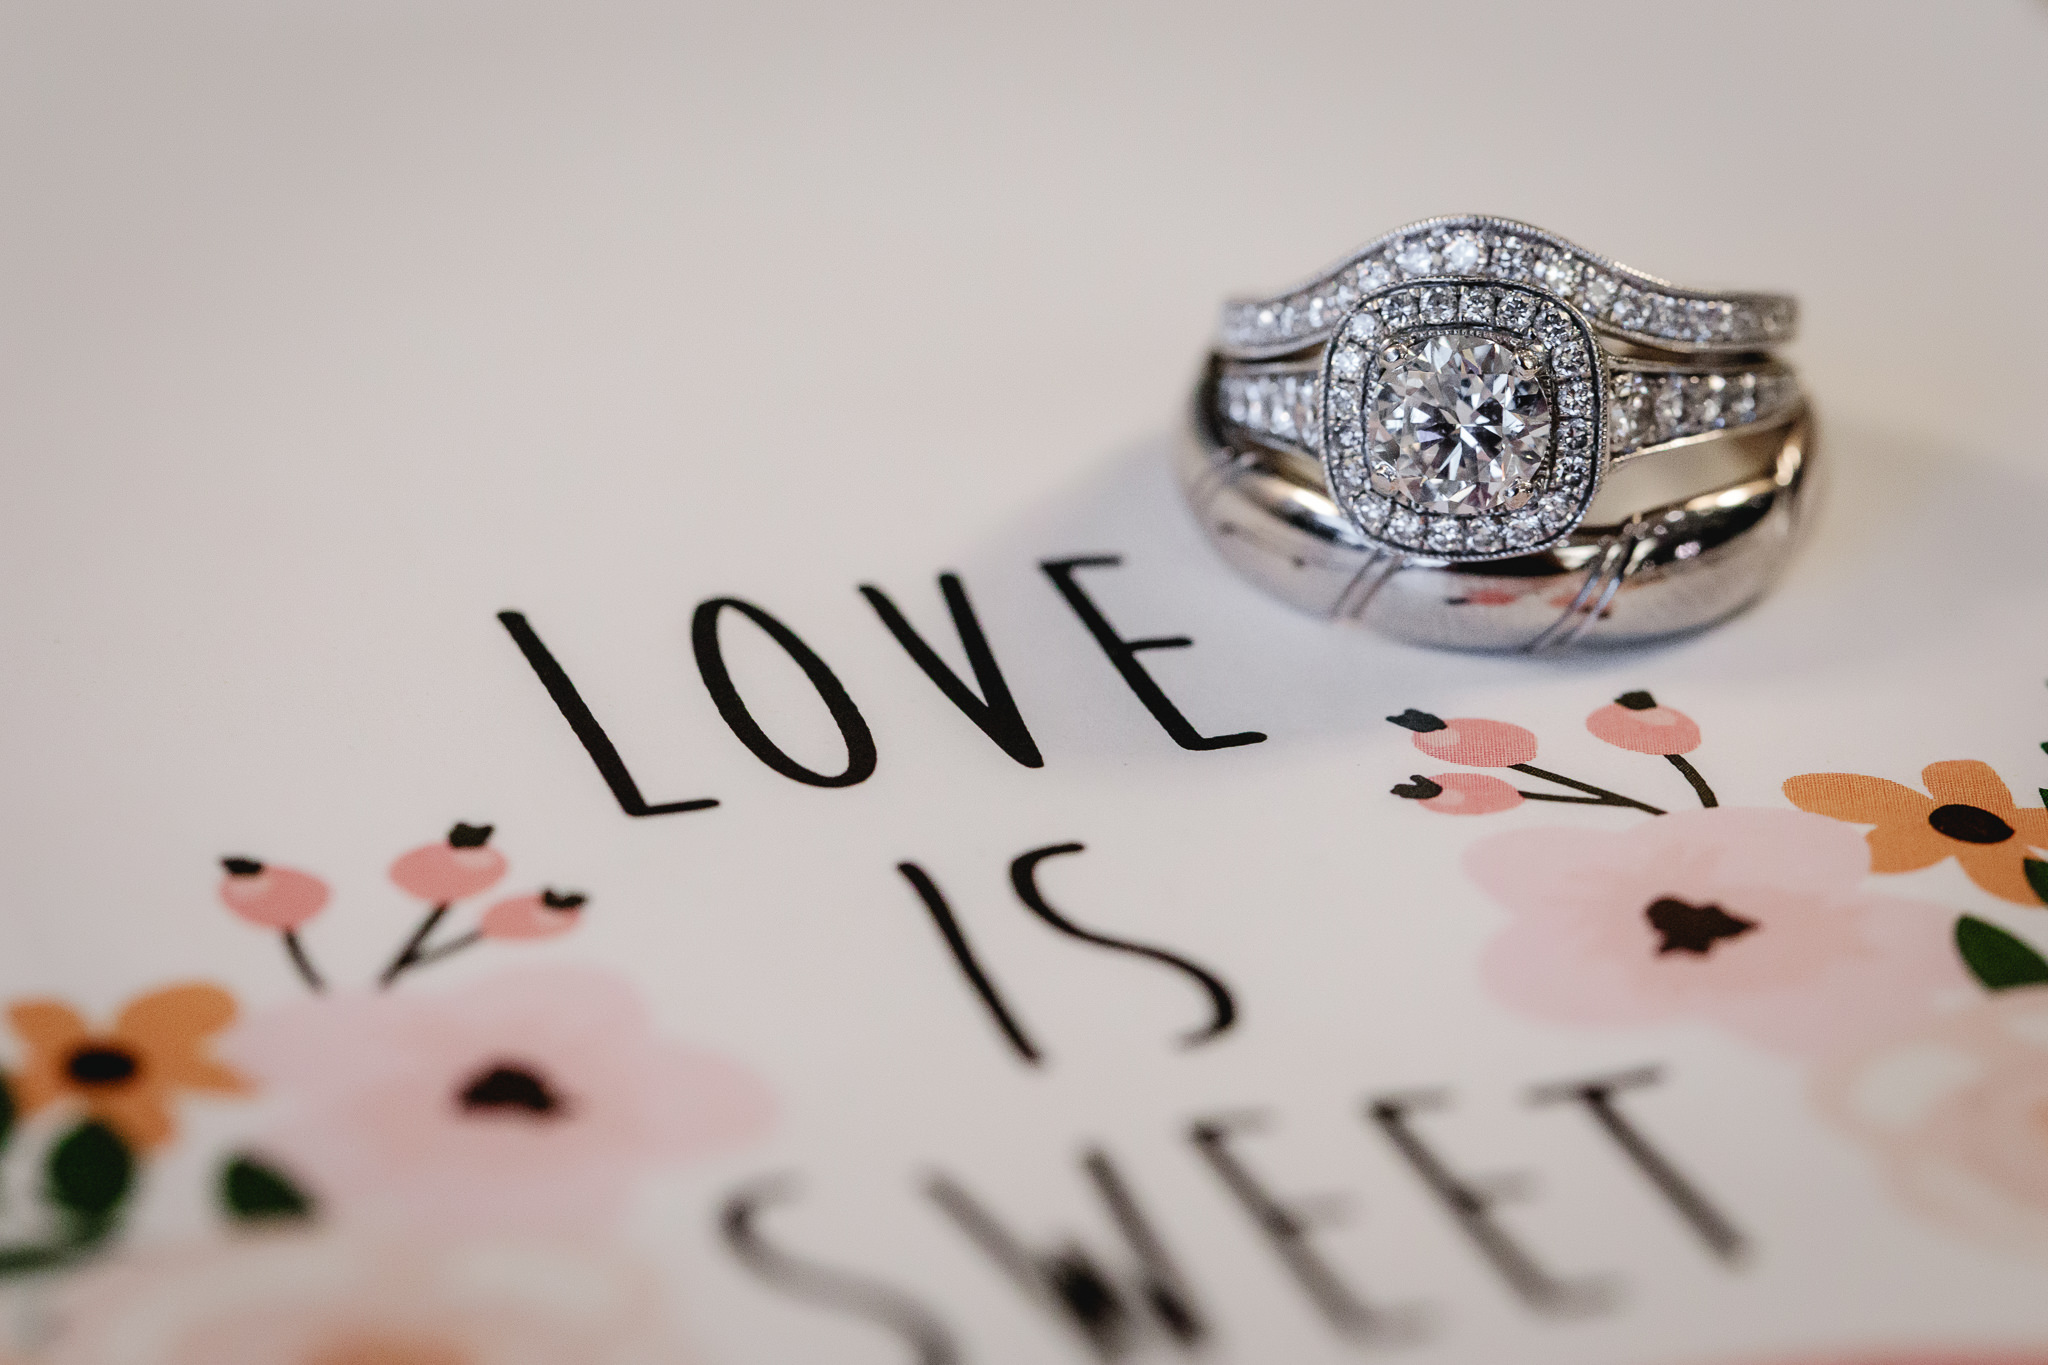 Diamond engagement ring and wedding bands by the word Love